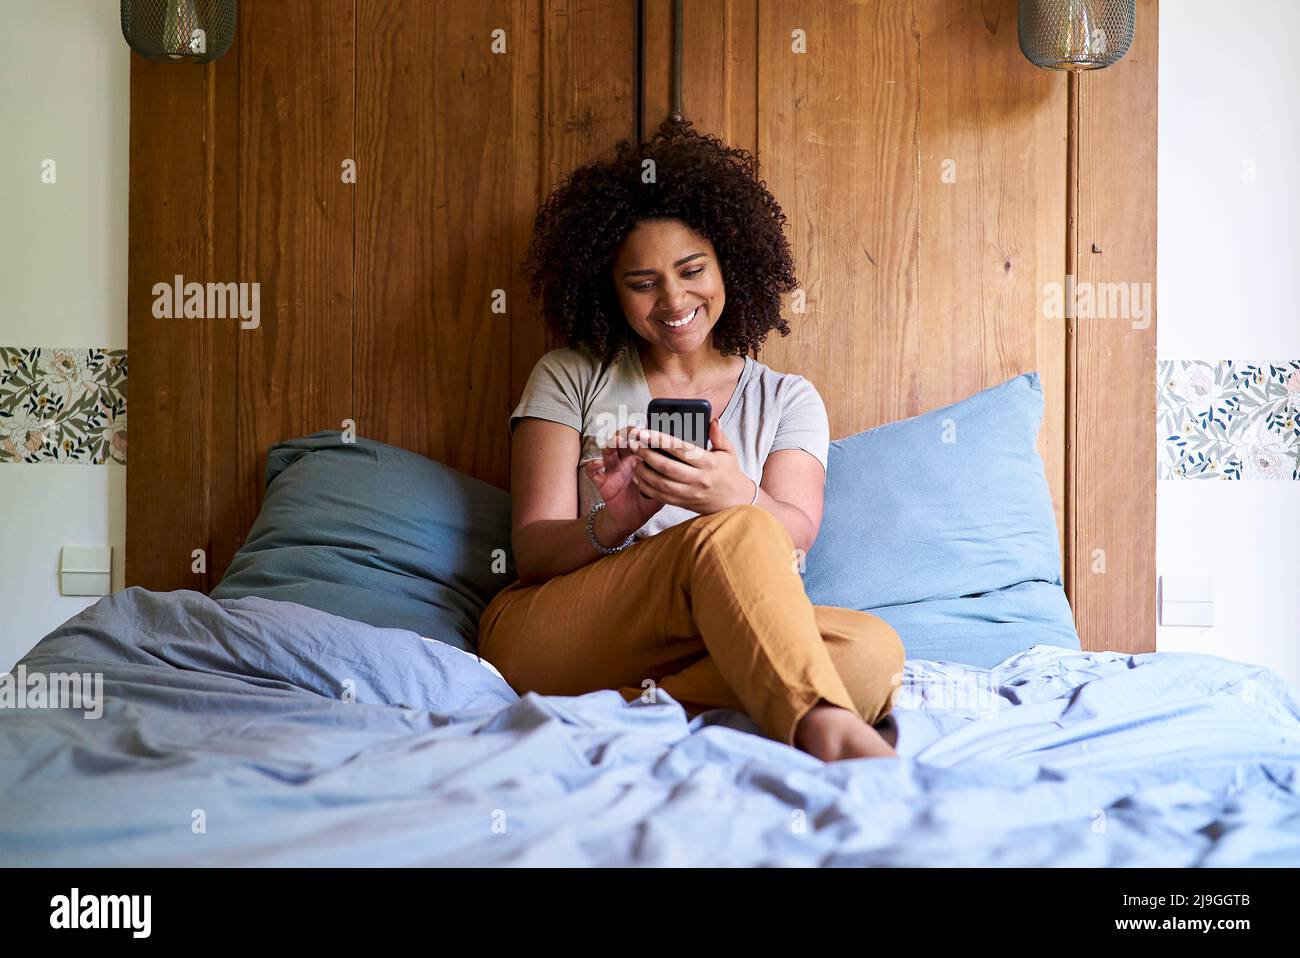 Woman using smart phone while sitting in bedroom Stock Photo